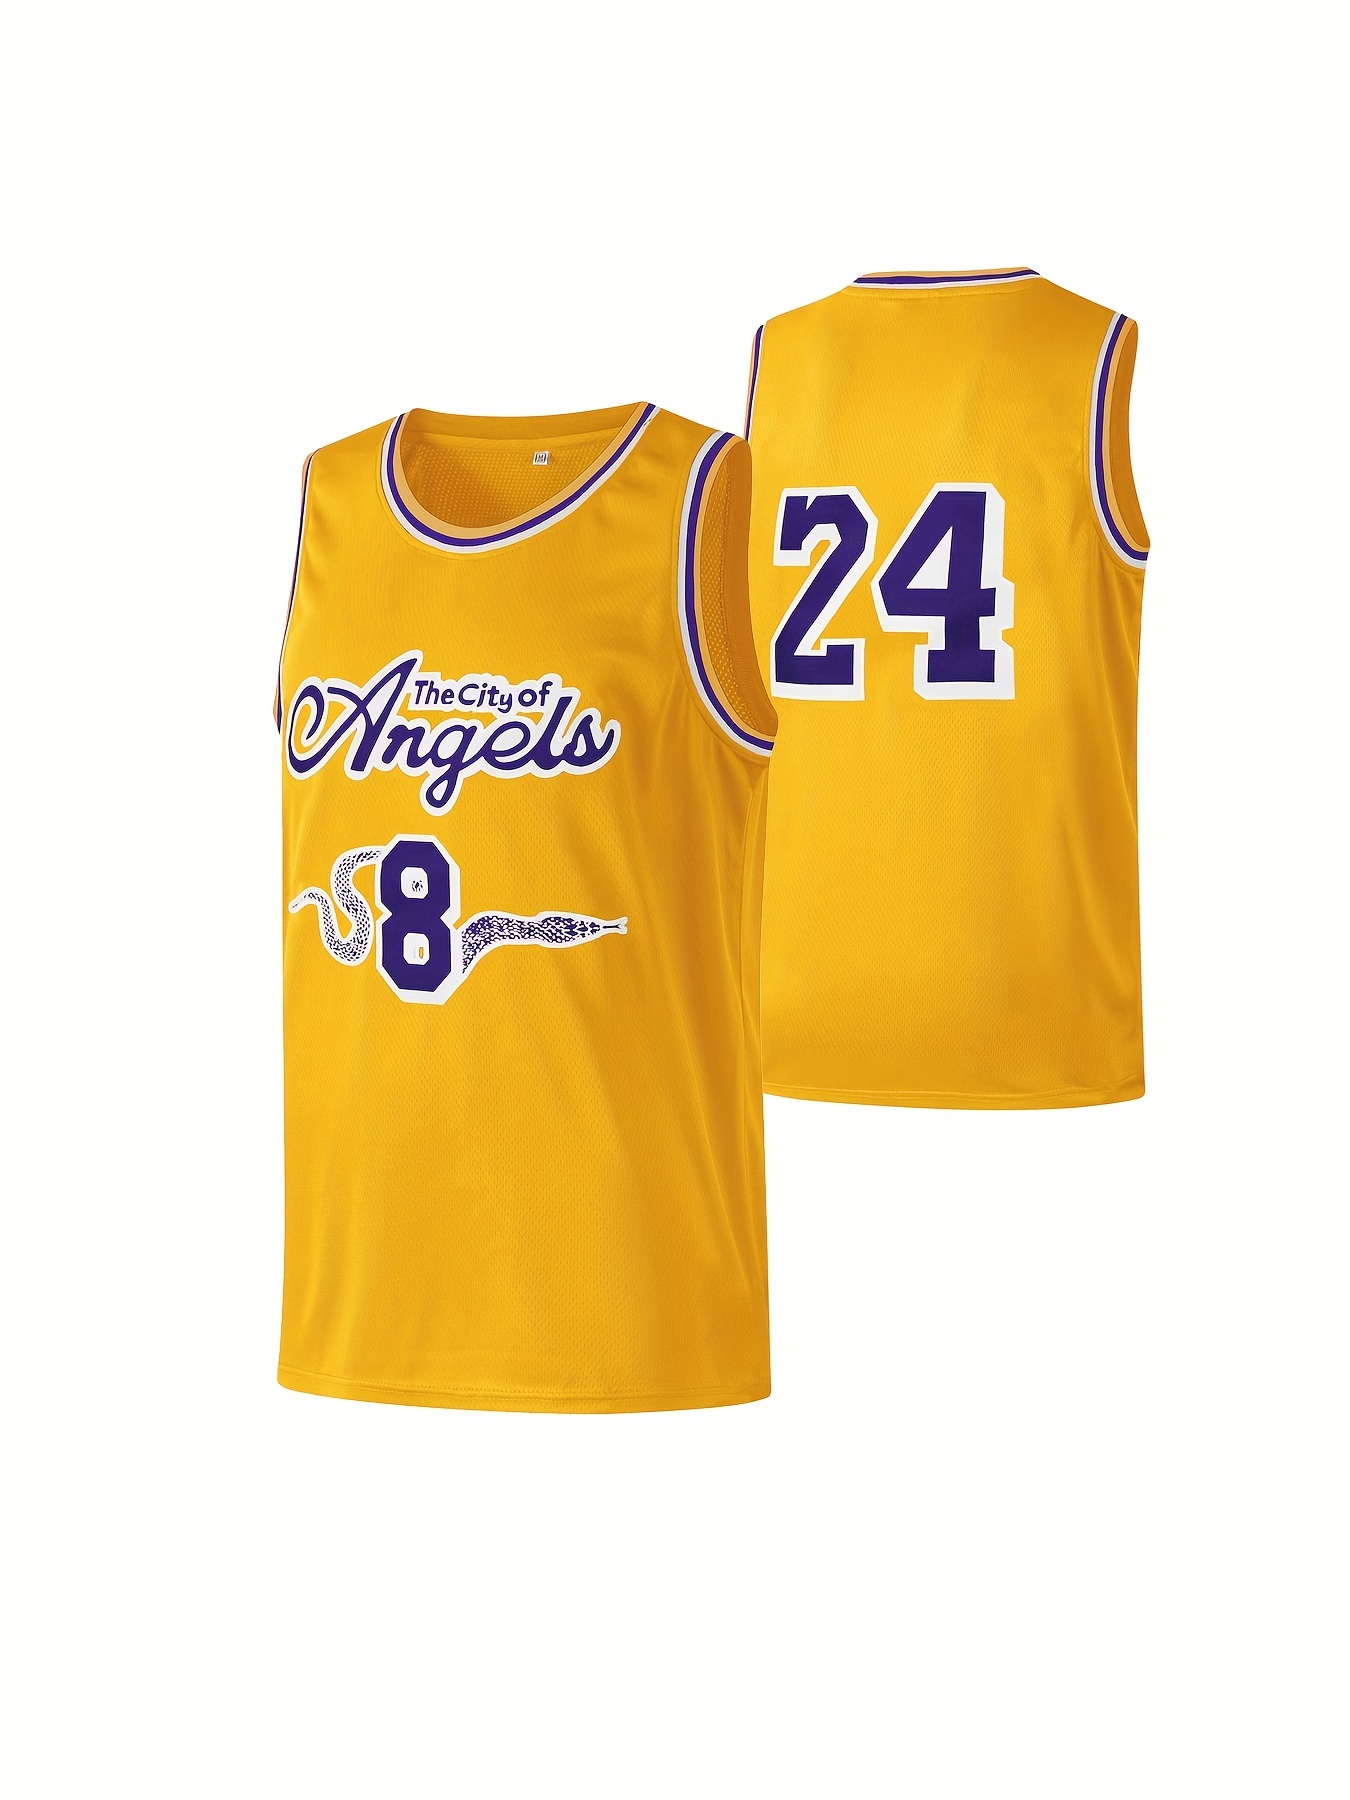 Temu Men's The City of Angels #8 24 Embroidered Basketball Jersey, Active Slightly Stretch Sports Uniform, Sleeveless Basketball Shirt for Training